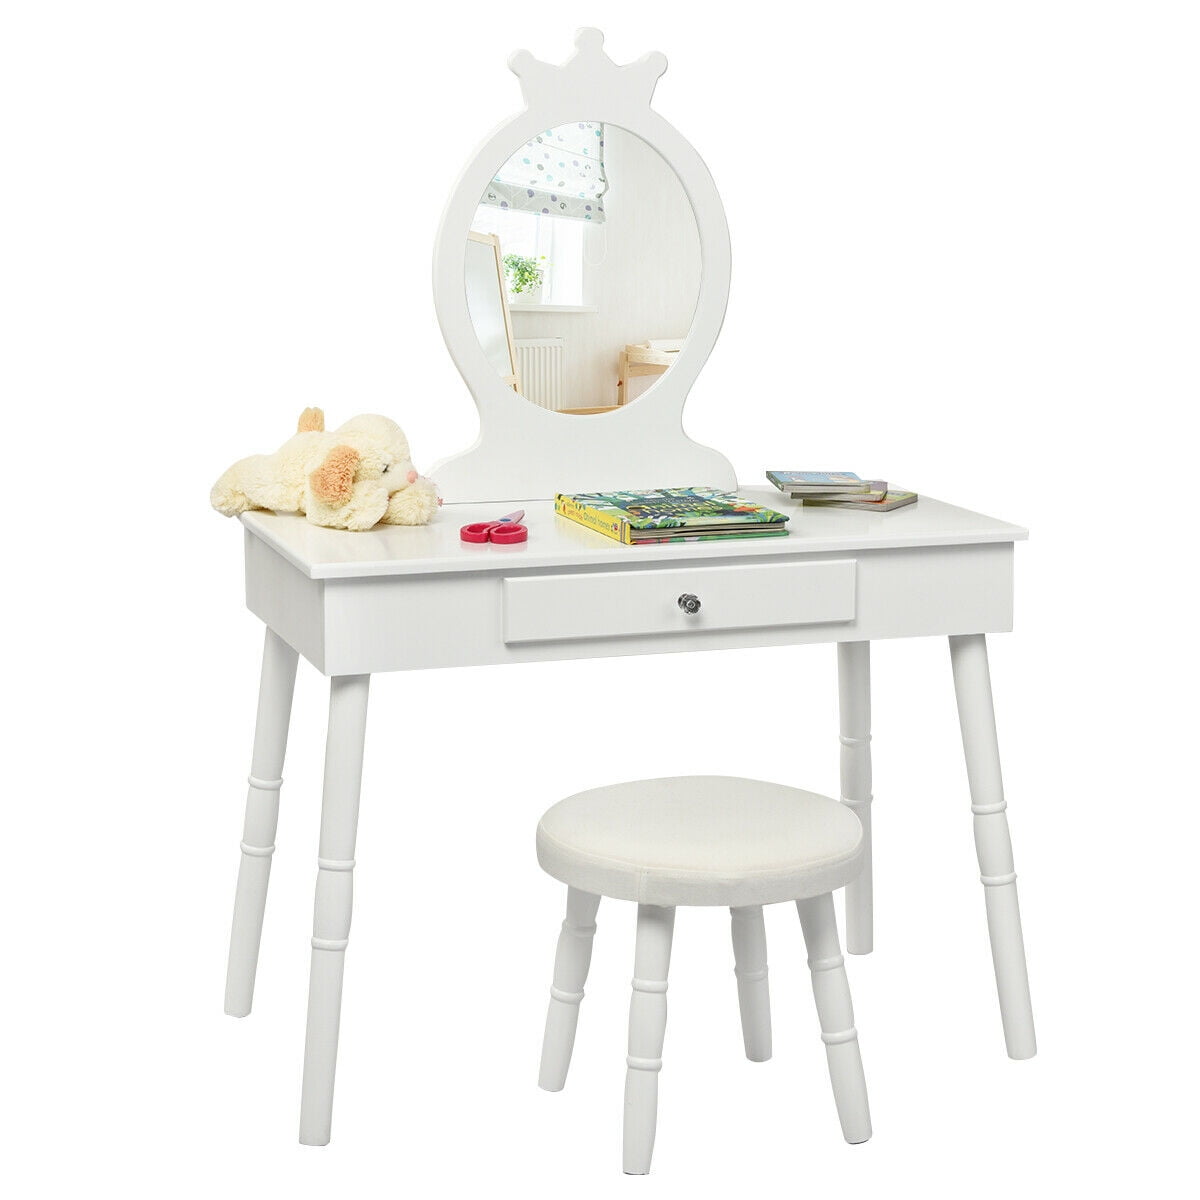 Details about   Girls Dressing Table Vanity Mirror Play Set Toy Make Up Desk W/Stool HOT SALE 